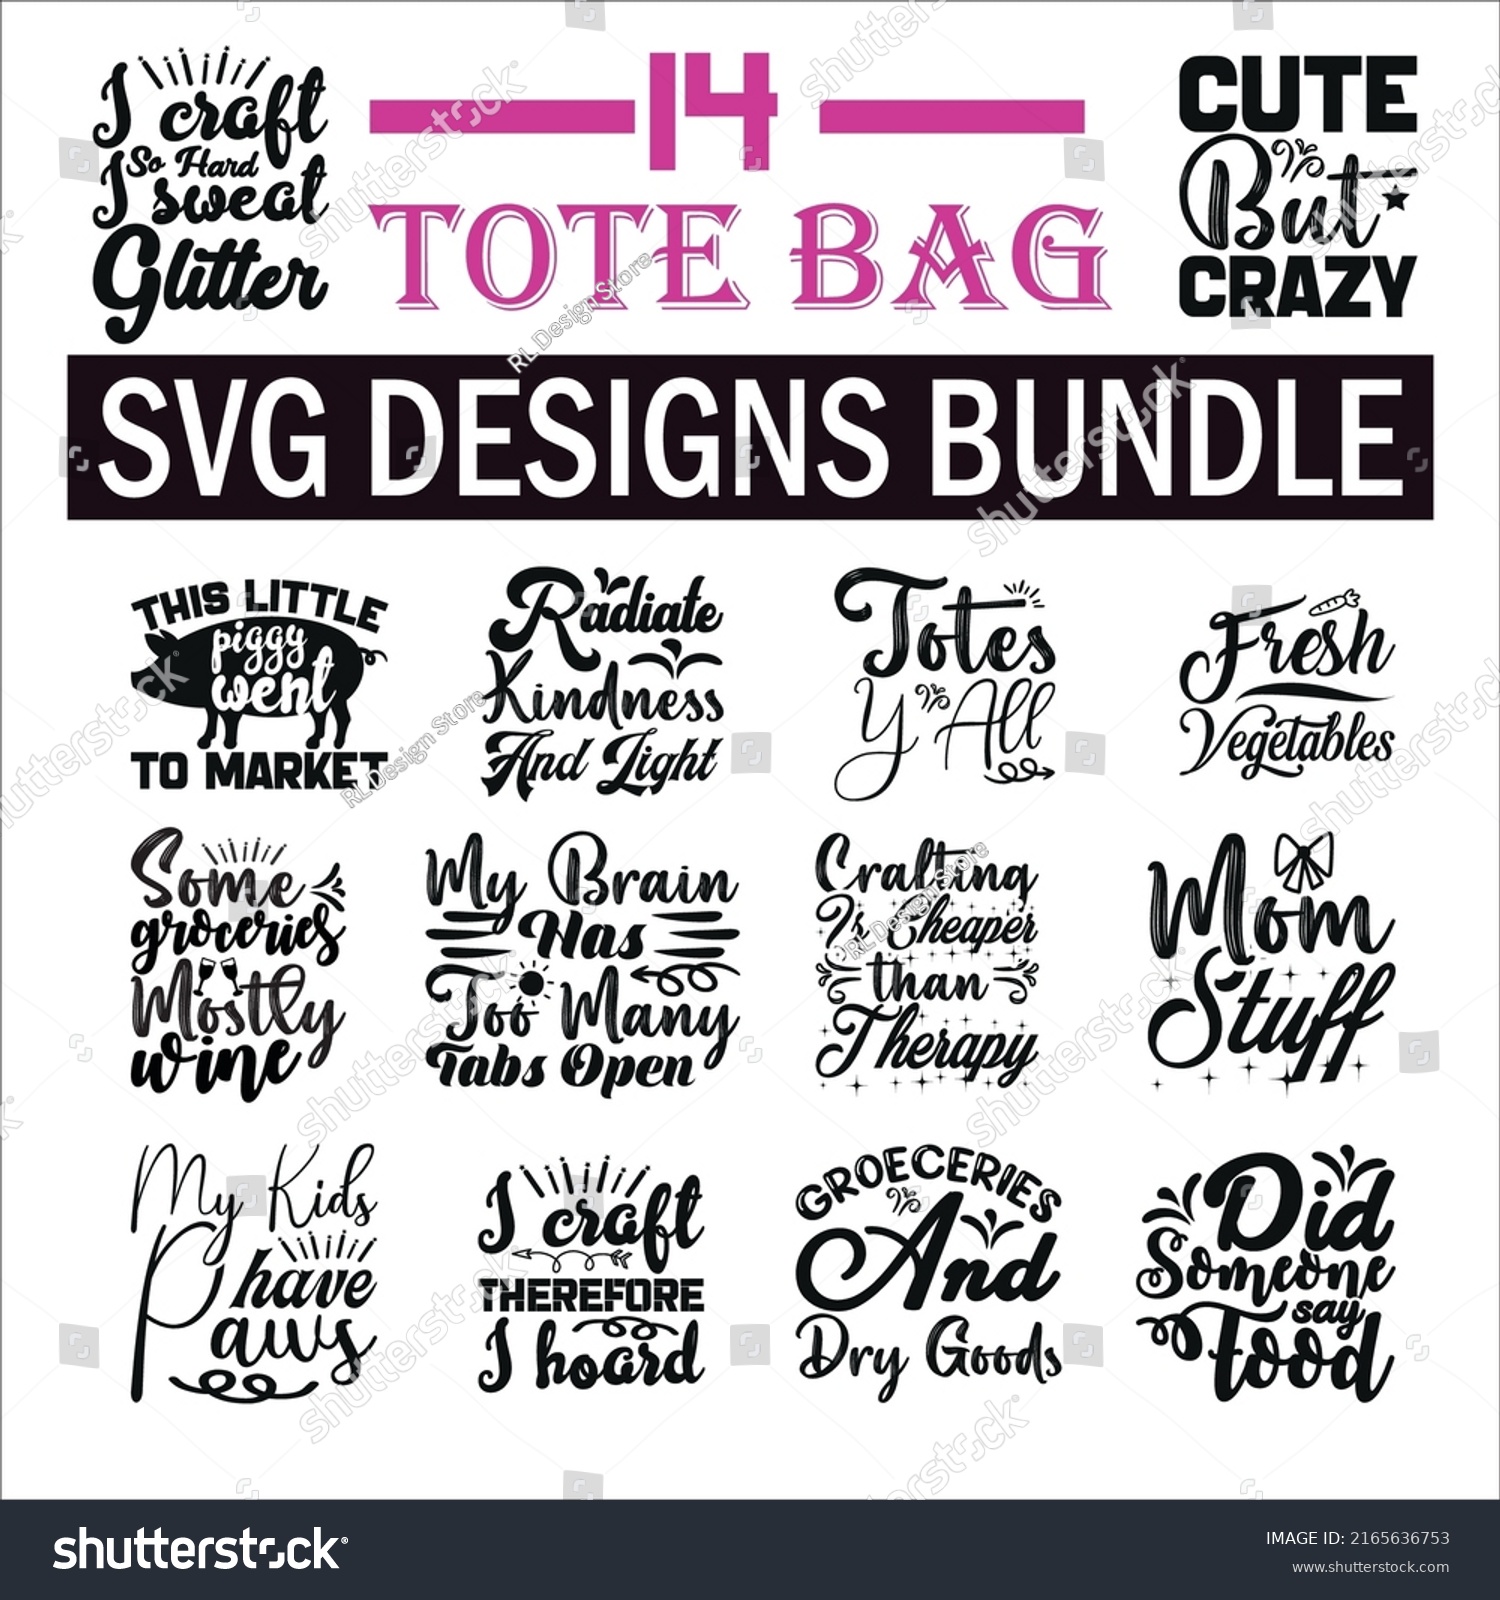 SVG of tote bag Quotes SVG Designs Bundle .tote bag quotes SVG cut files bundle, tote bag quotes t shirt designs bundle, Quotes about funny, hand  cut files, tote bag eps files,  svg